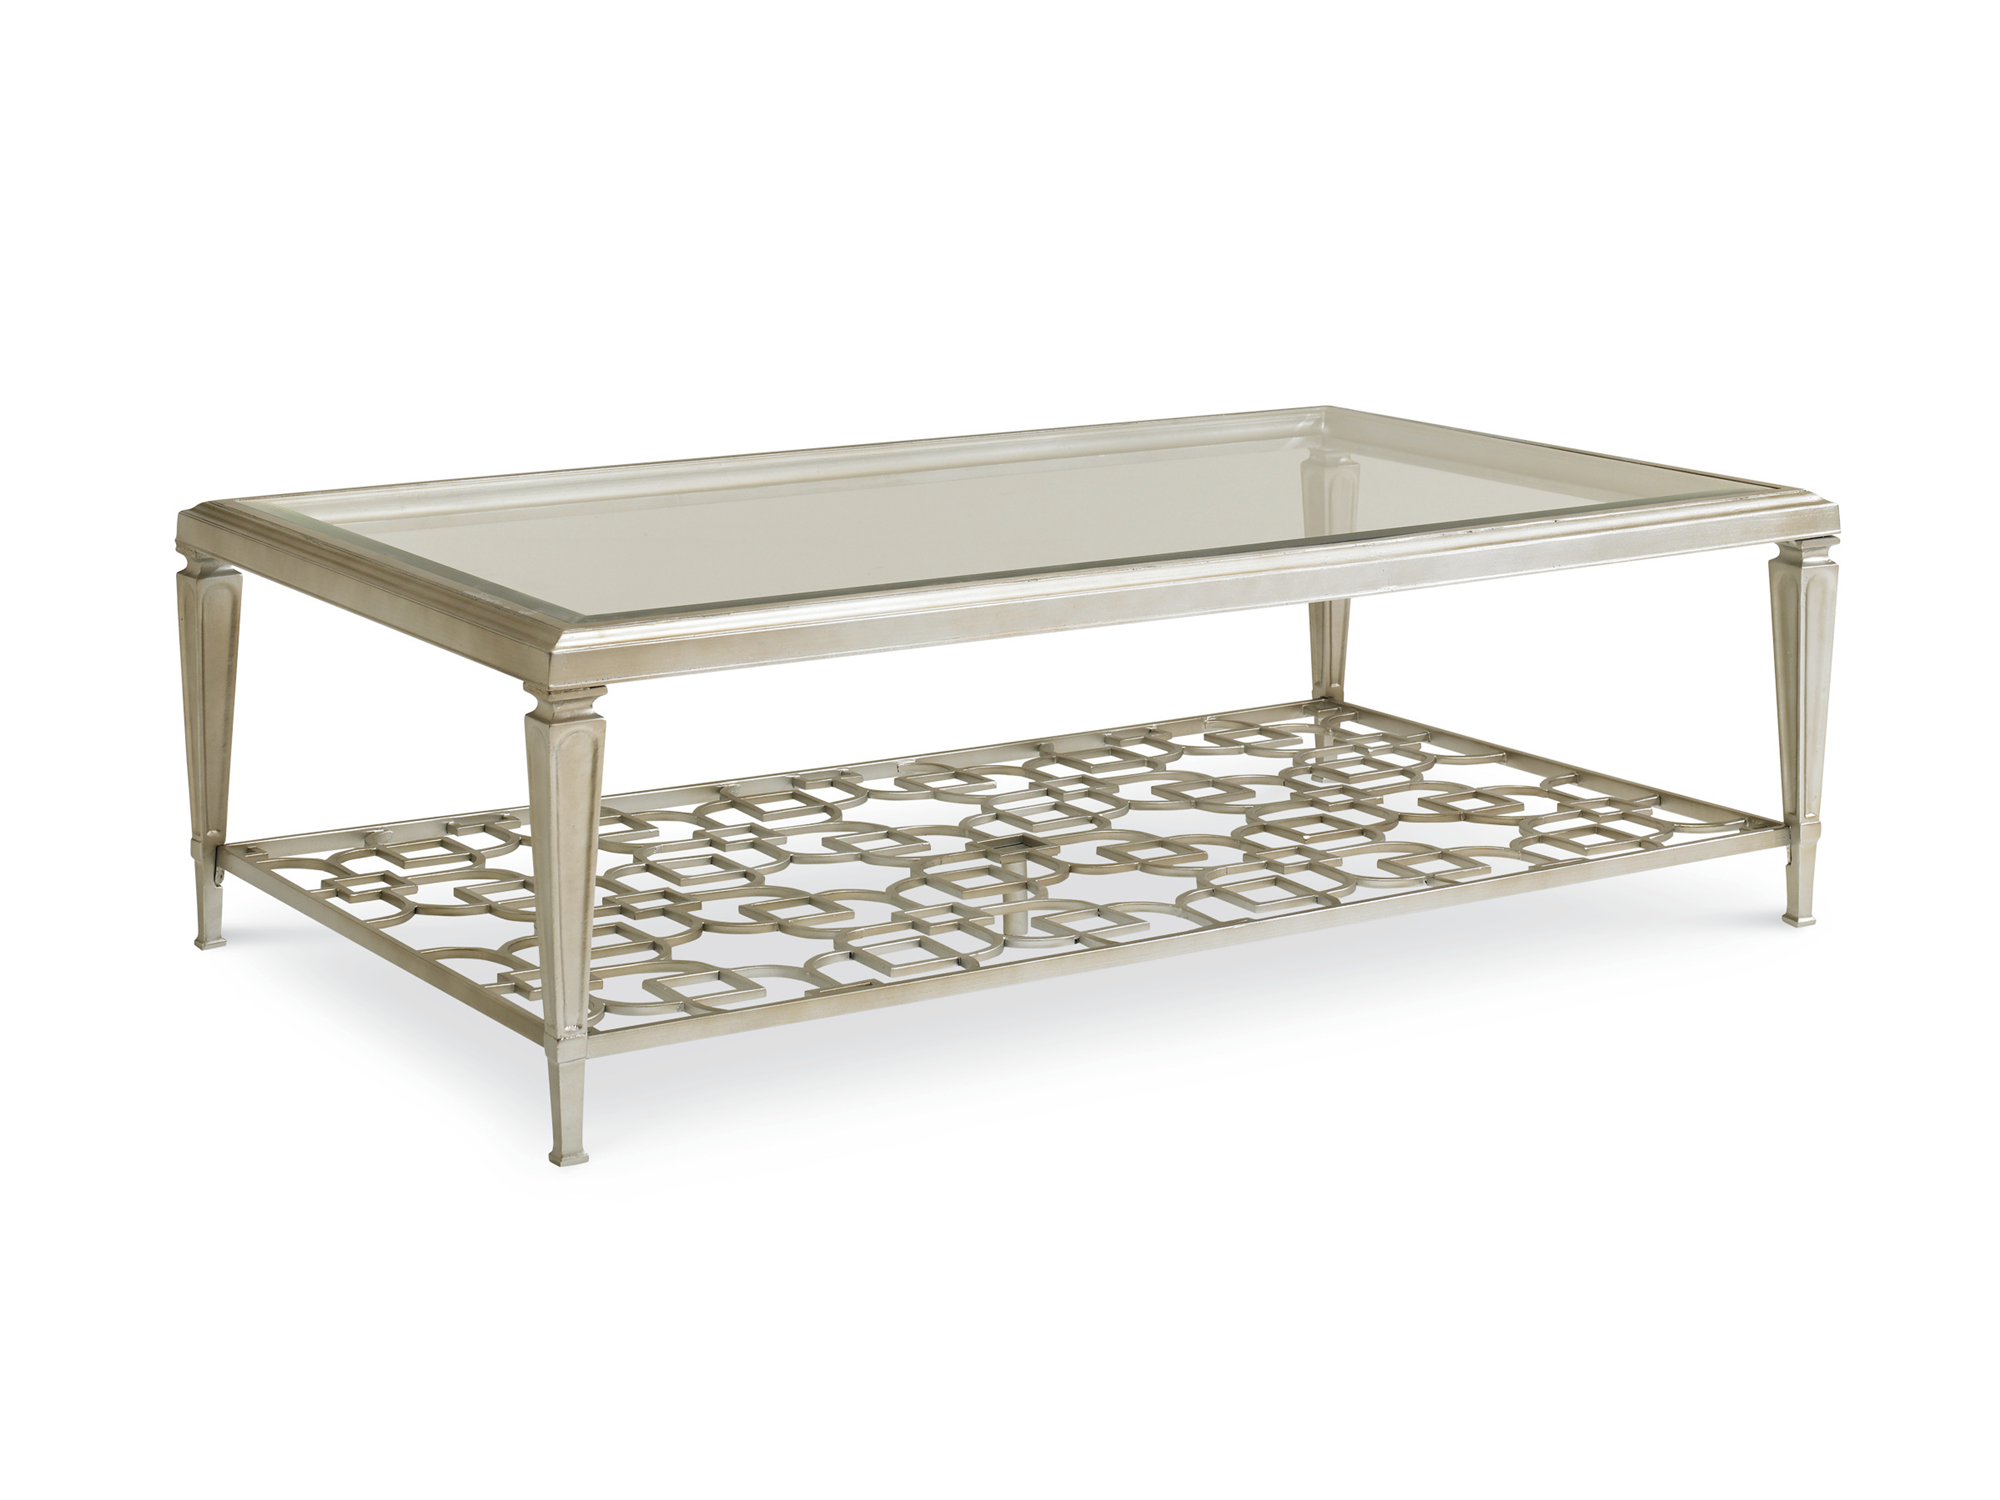 Babs Socialite Cocktail Table in Tauple Silver Leaf - Euro Living Furniture